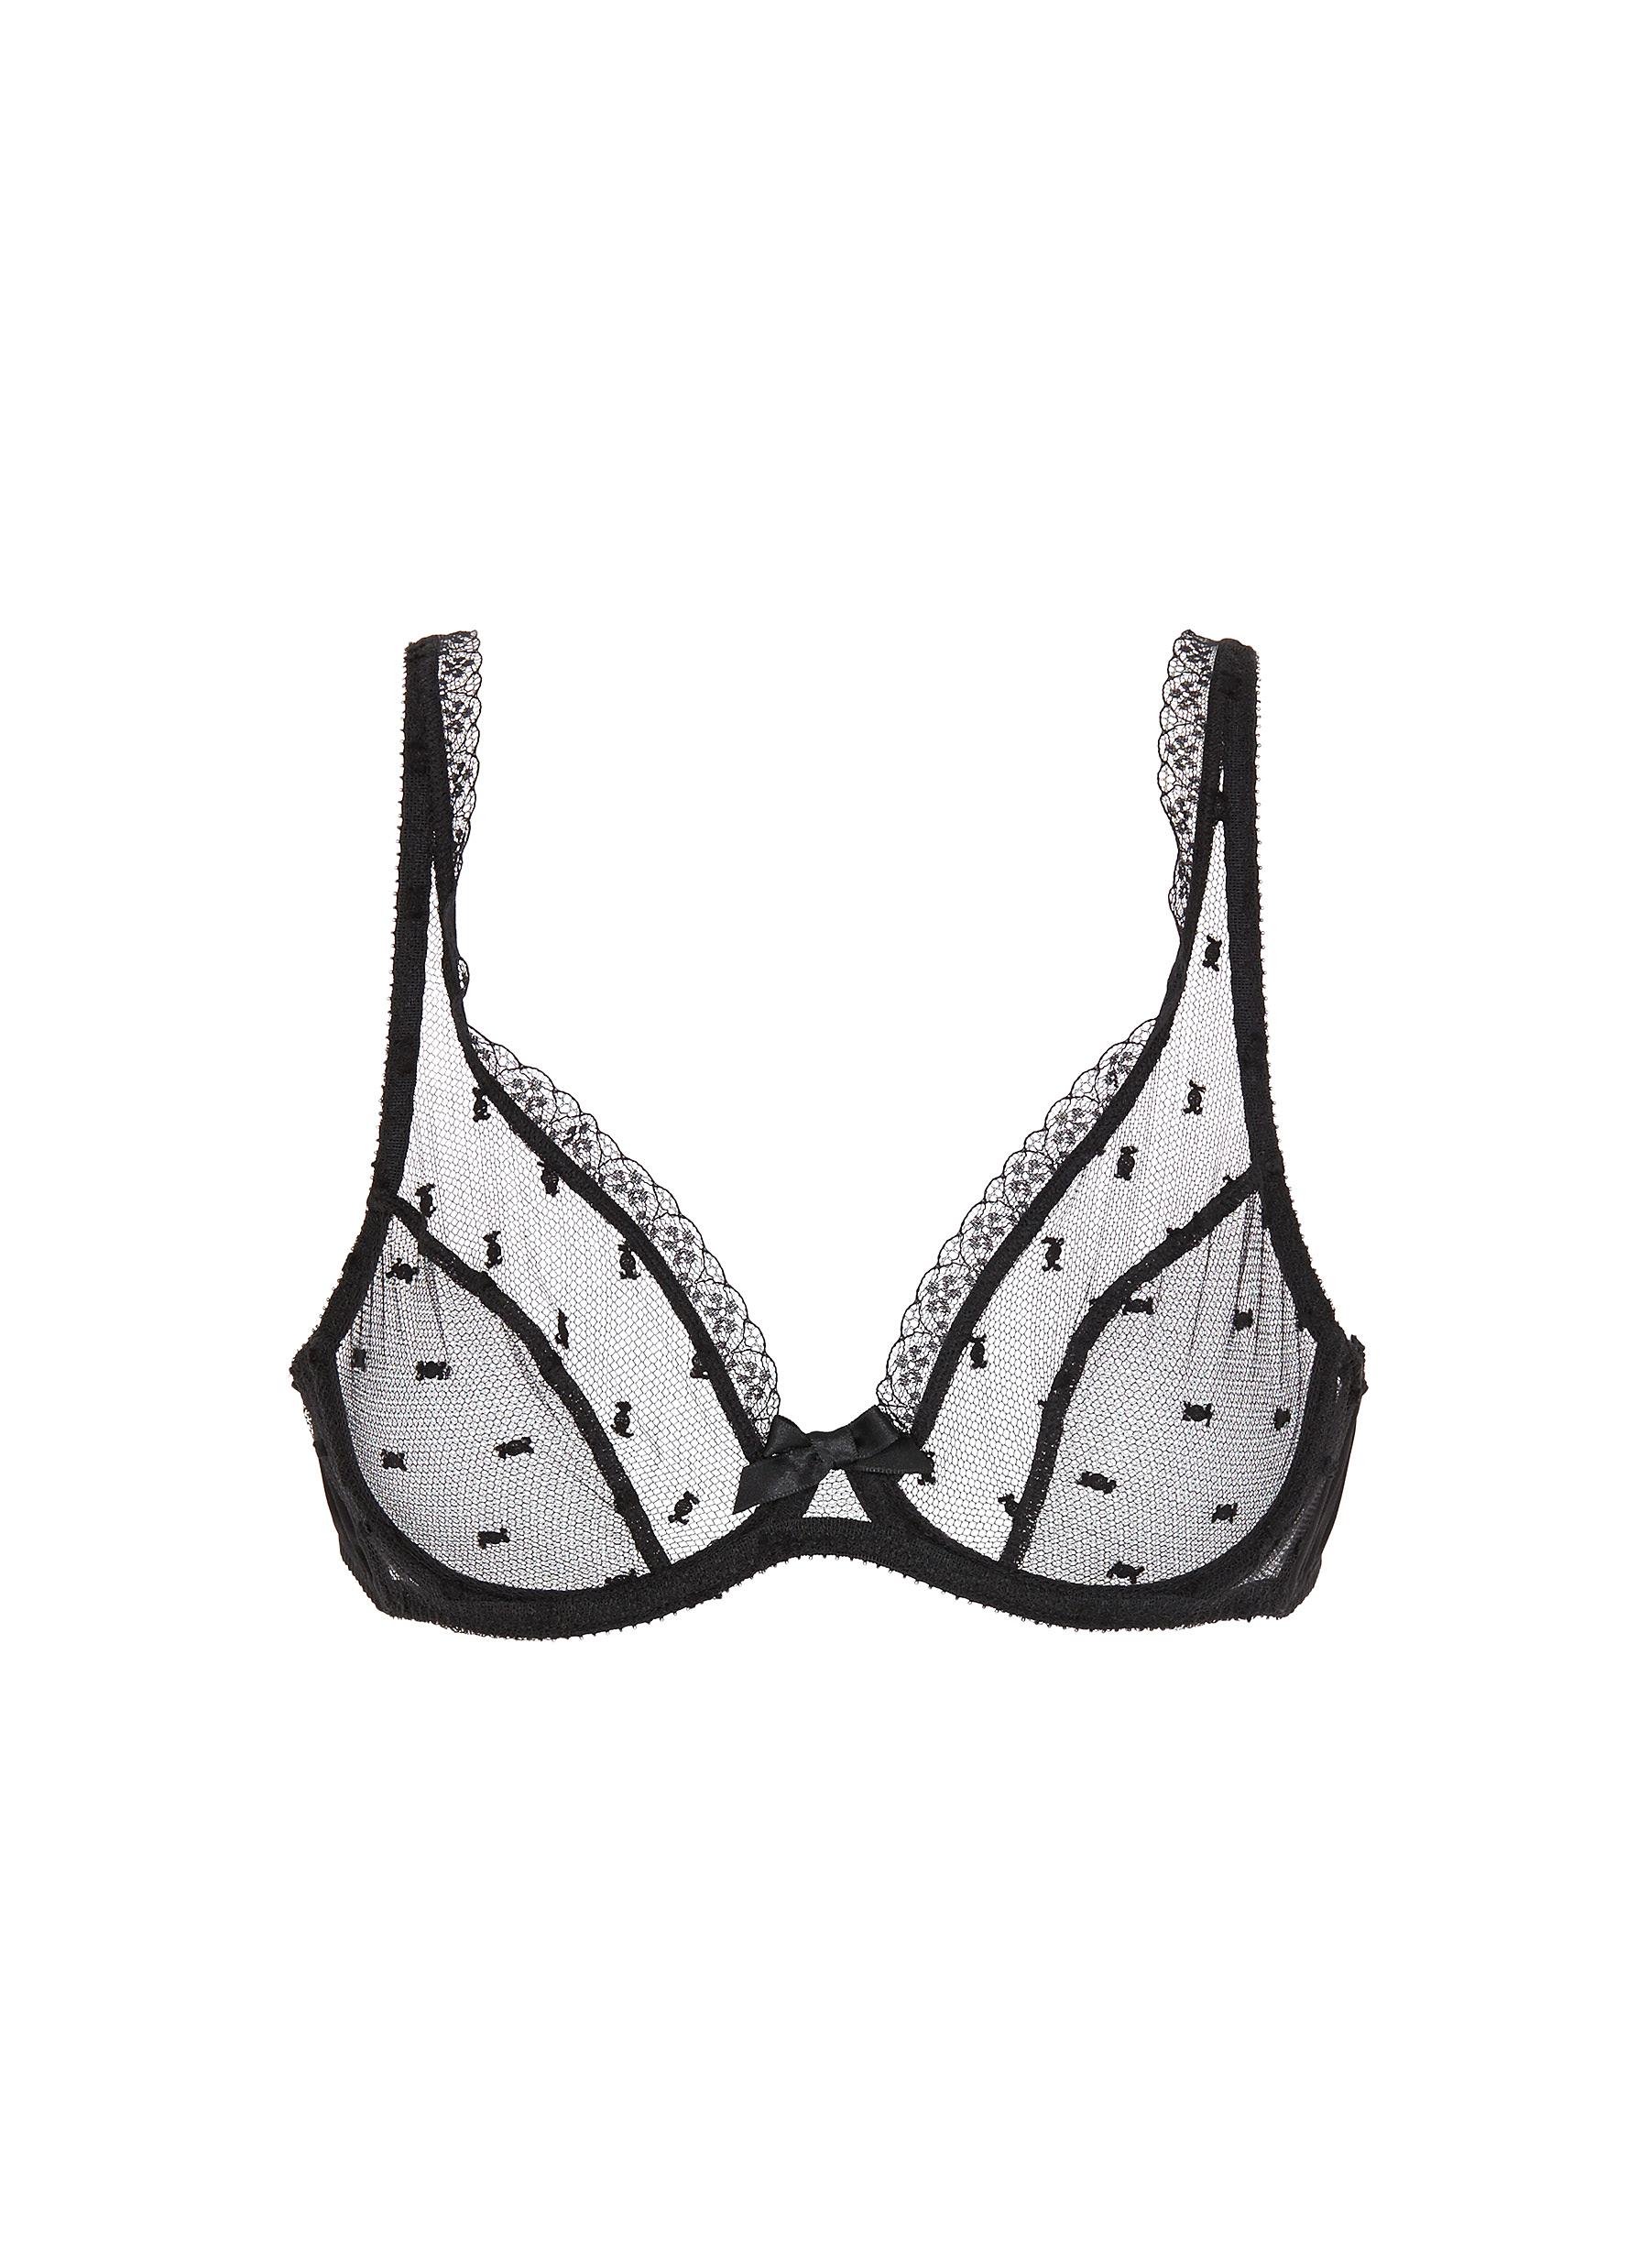 AGENT PROVOCATEUR, 'Madelina' Swiss dot embroidered tulle bra, Women